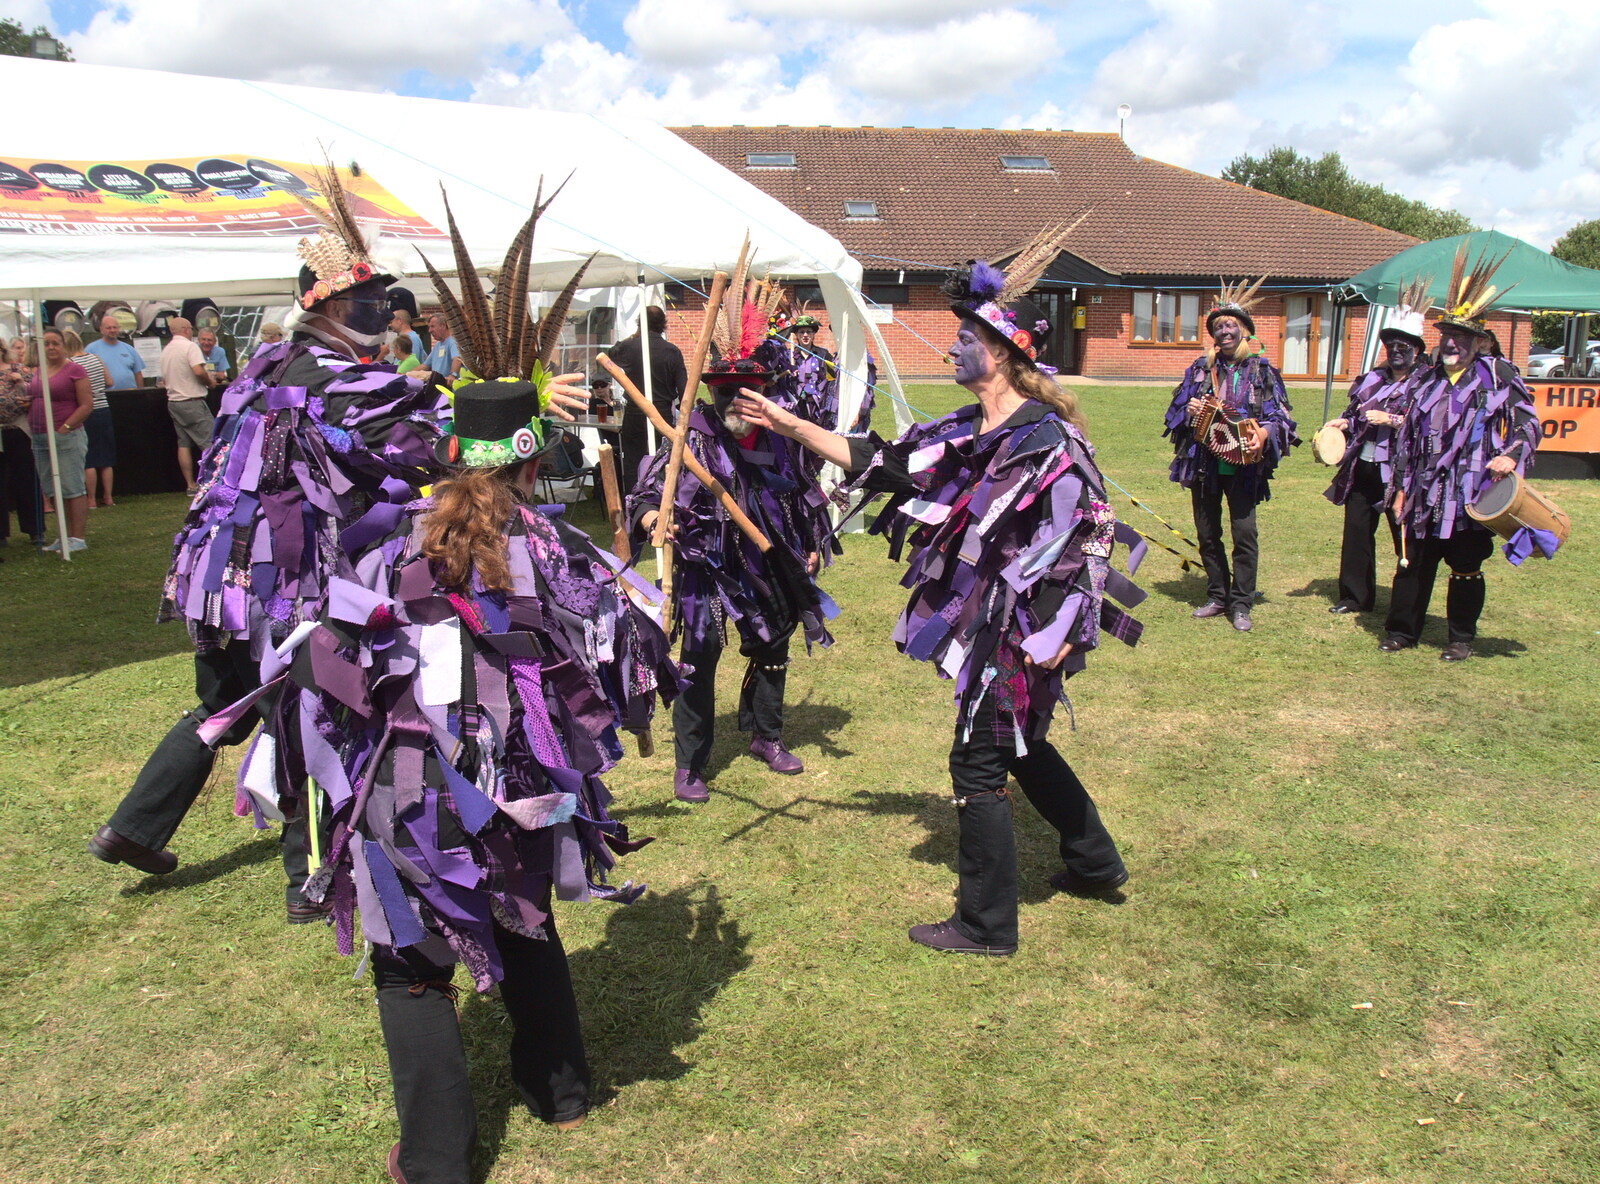 More morris dancing from Pedants Revolt from The Humpty Dumpty Beer Festival, Reedham, Norfolk - 22nd July 2017